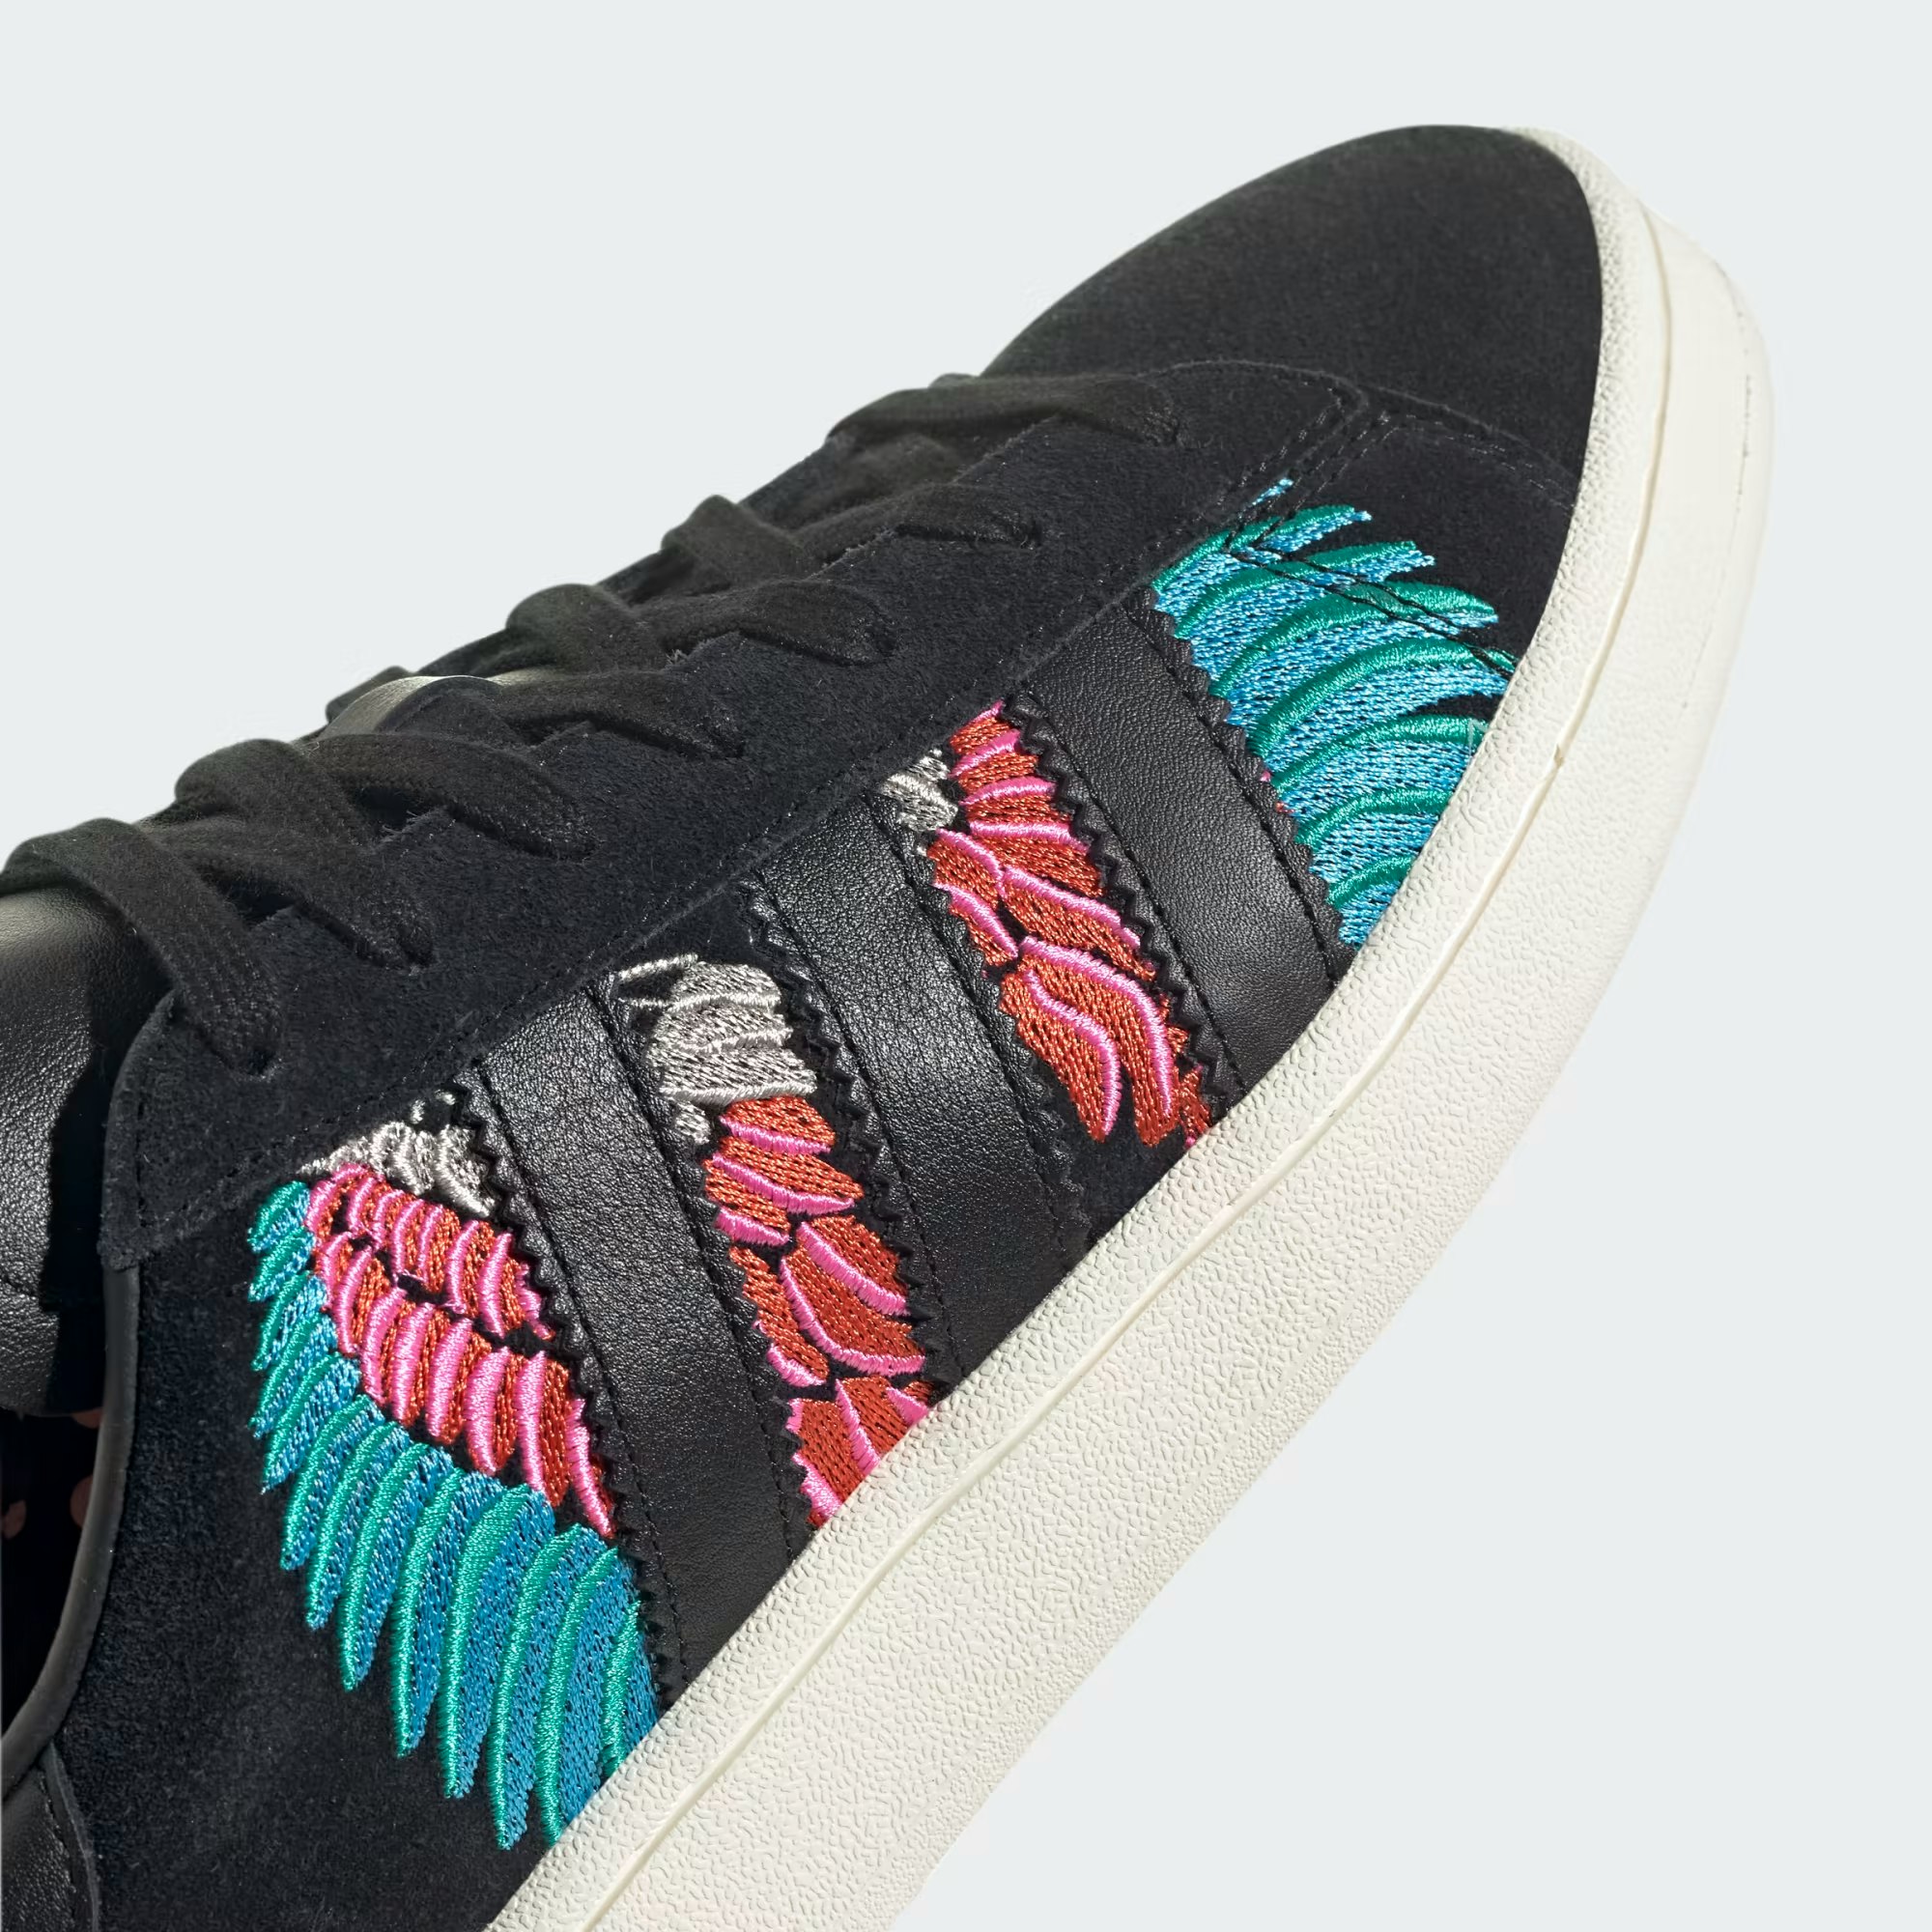 Notting Hill Carnival x adidas Campus 00s "Core Black"